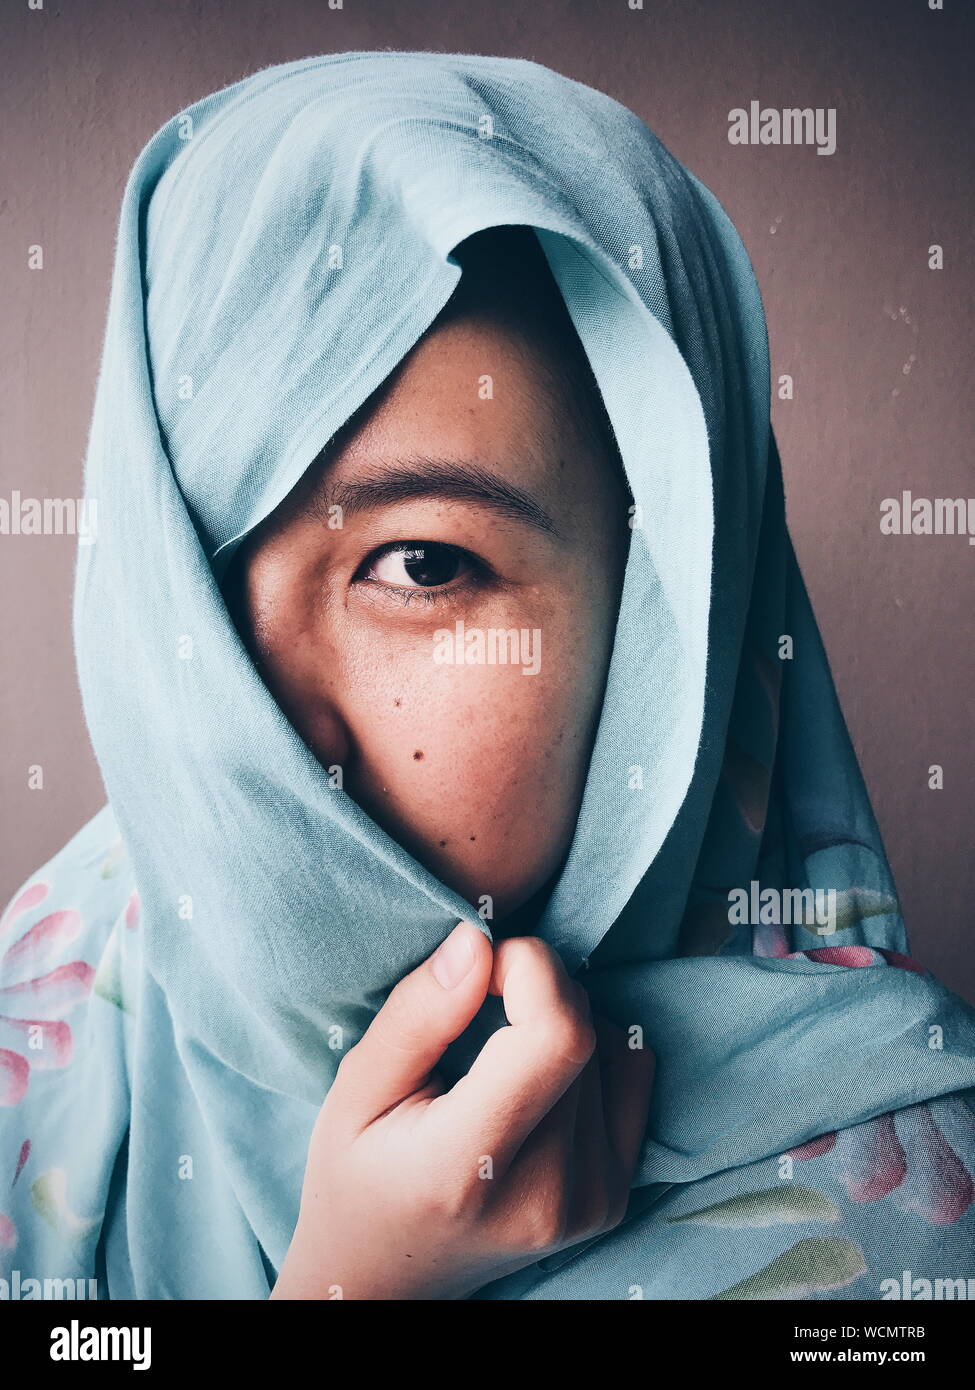 Close-up Portrait Of Woman Wearing Hijab Against Wall Stock Photo